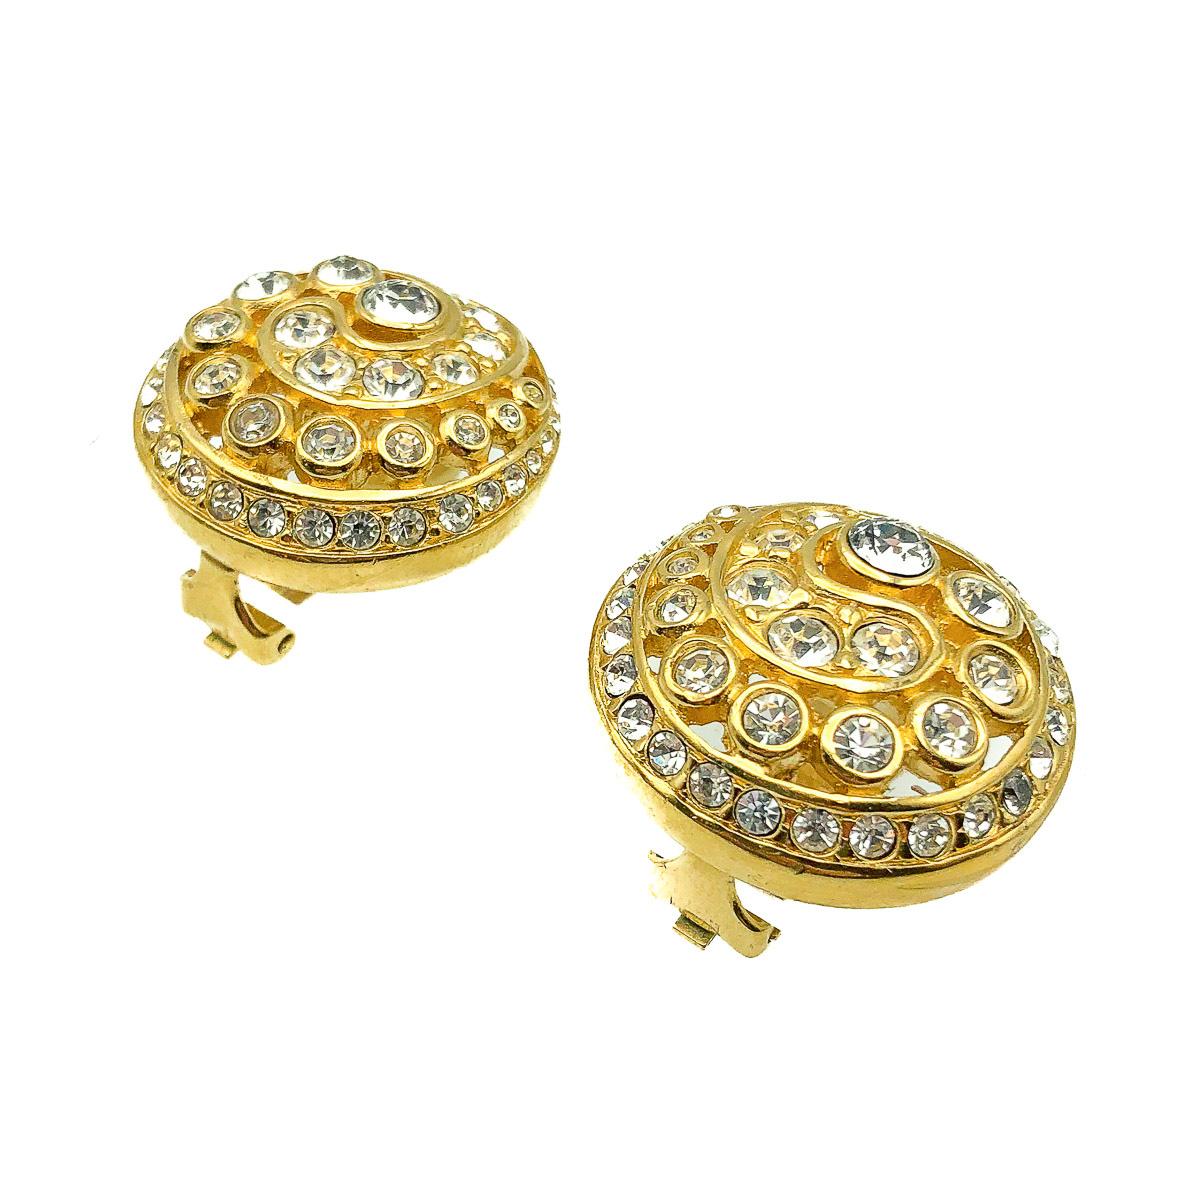 Vintage Dior Crystal Swirl Earrings. Crafted in gold plated metal and set with crystal chatons in a graduating swirl. In very good vintage condition. Signed. Approx. 2.7cms. A glamourous pair of earrings from the House of Dior that will undoubtedly